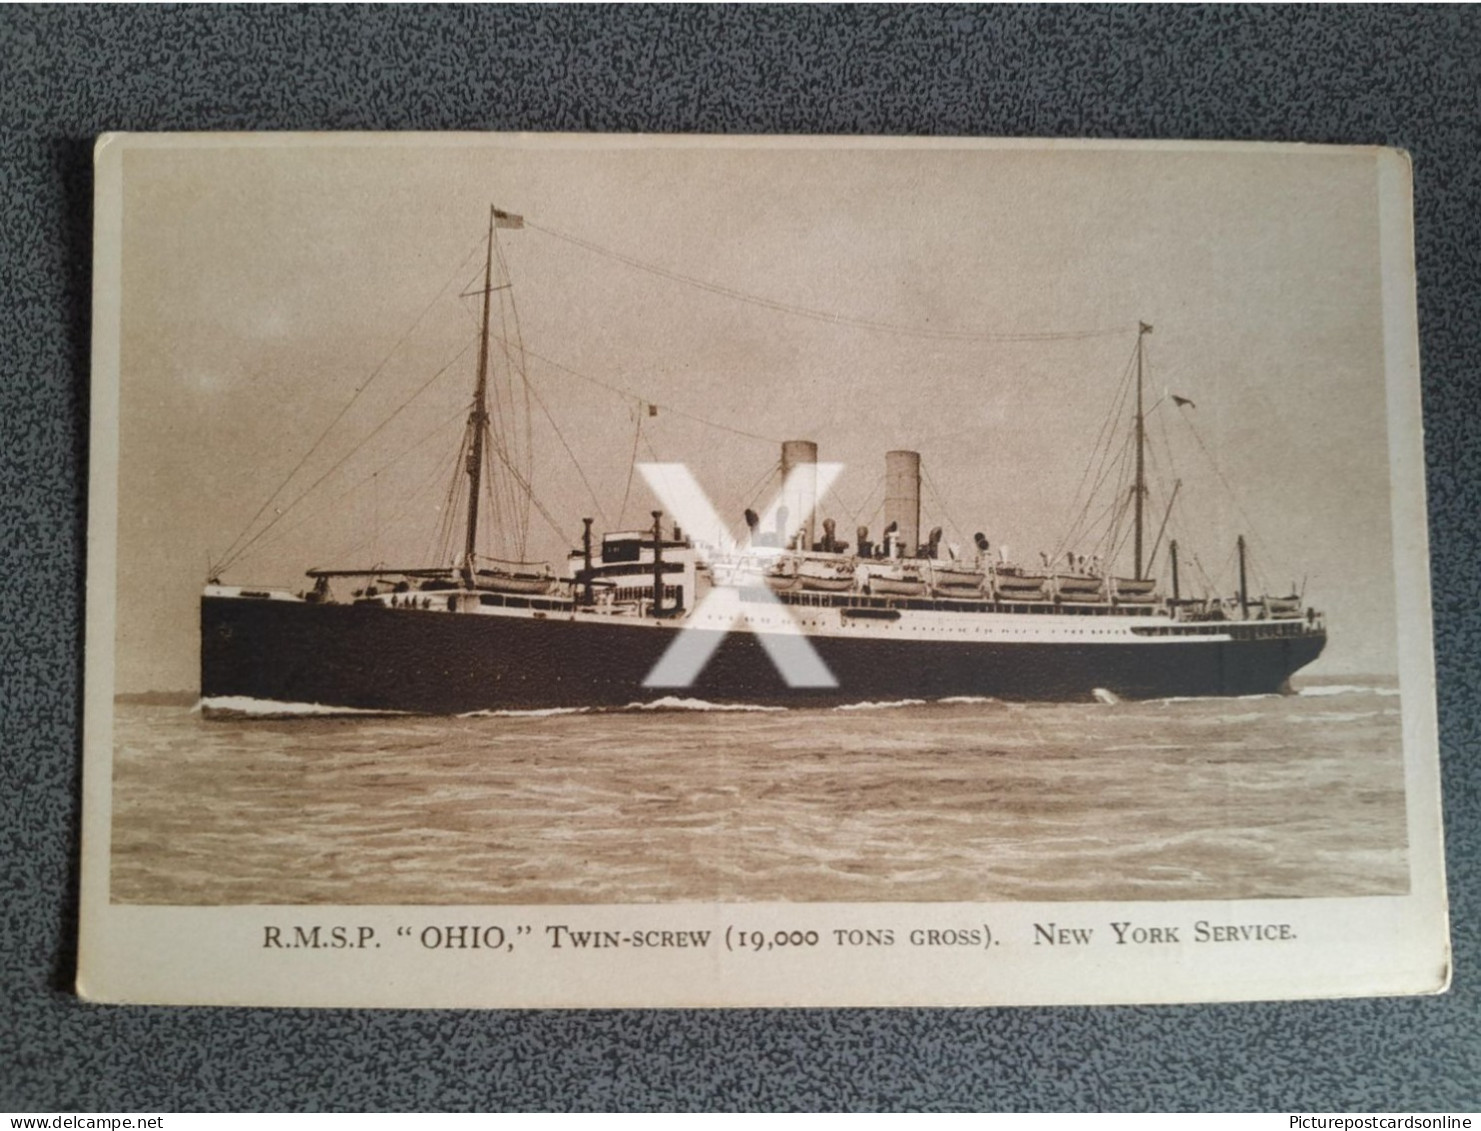 ROYAL MAIL STEAM PACKET OHIO OLD B/W POSTCARD STEAMER SHIPPING NEW YORK SERVICE RMSP AGENT HOSPITAL STREET PERTH - Paquebots